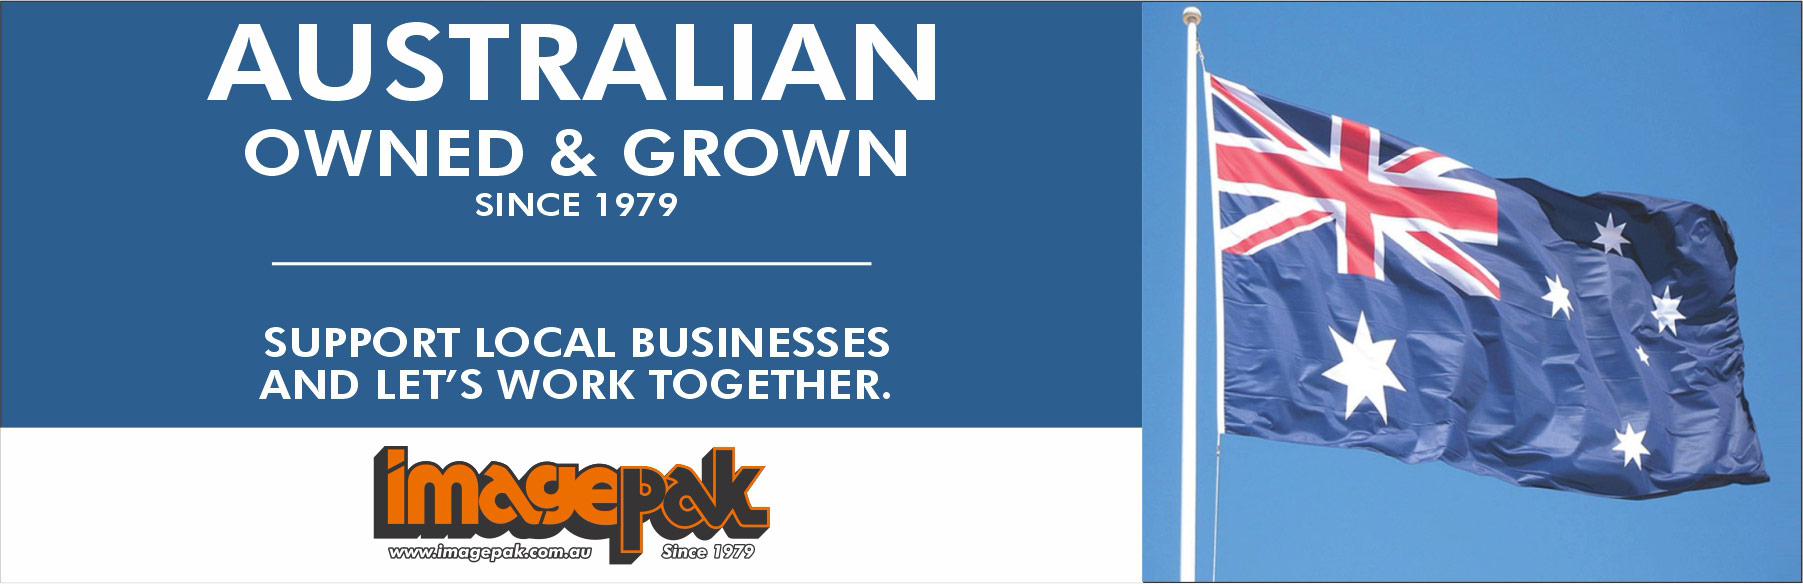 australian-owned-and-grown